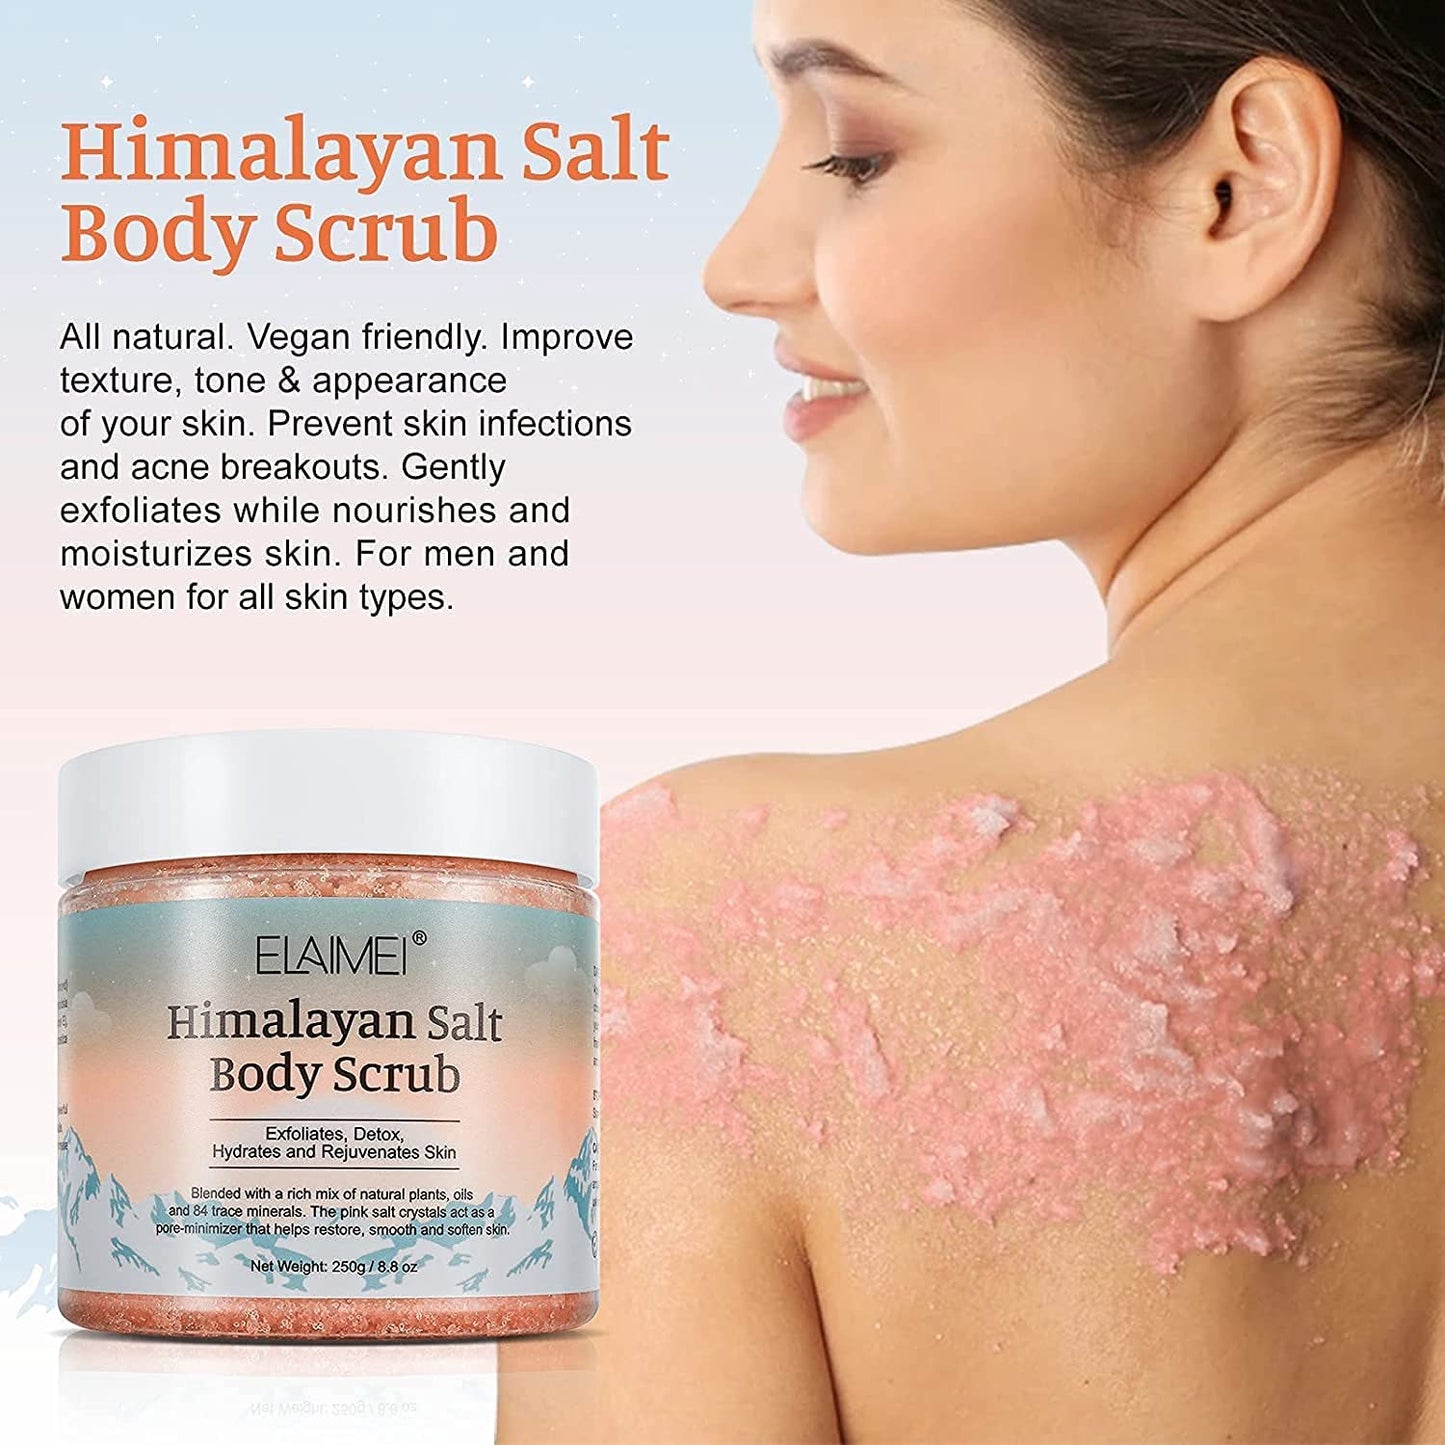 Elaimei Premium Himalayan Salt Body Scrub with Lychee Oil Natural Exfoliating Salt Scrub for Acne, Cellulite, Deep Cleansing, Scars, Wrinkles, Exfoliate and Moisturize Skin